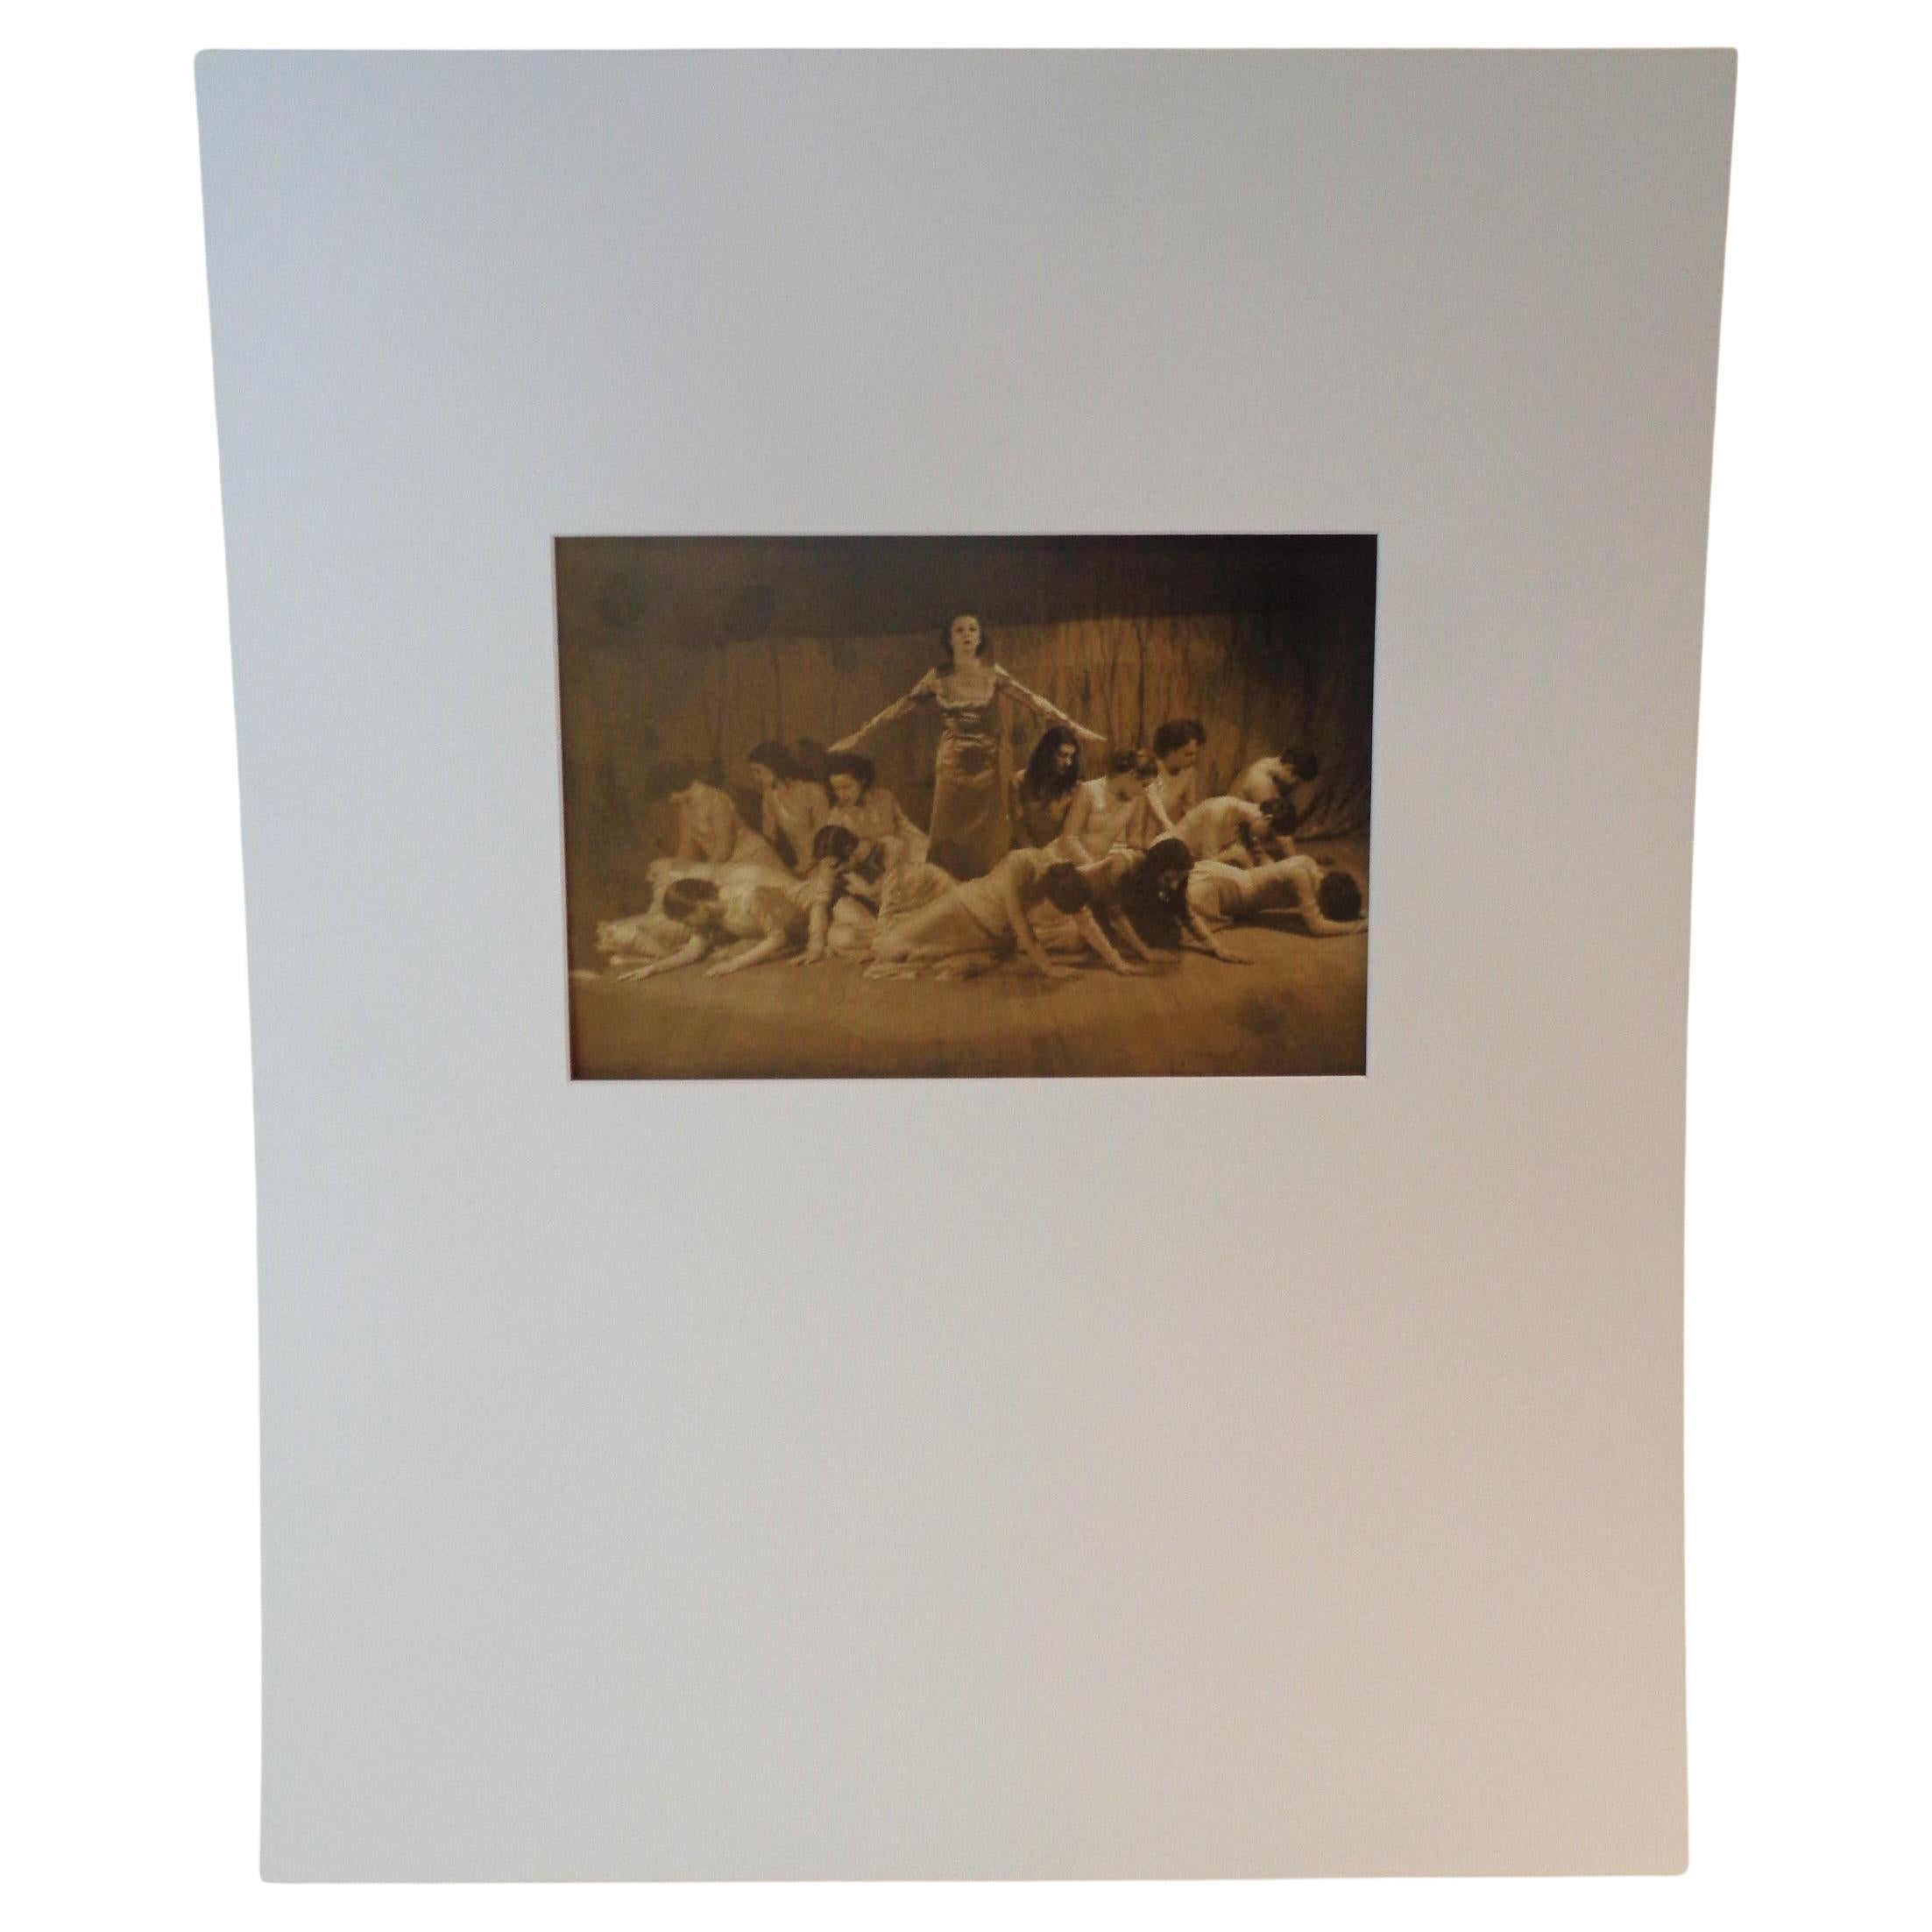 Early original sepia tone gelatin silver print photograph reminiscent of a Merce Cunningham Avant Garde art dance performance. By Rochester NY photographer Ned Hungerford / pencil signed lower right corner. Circa 1900-1910. Mat size 16